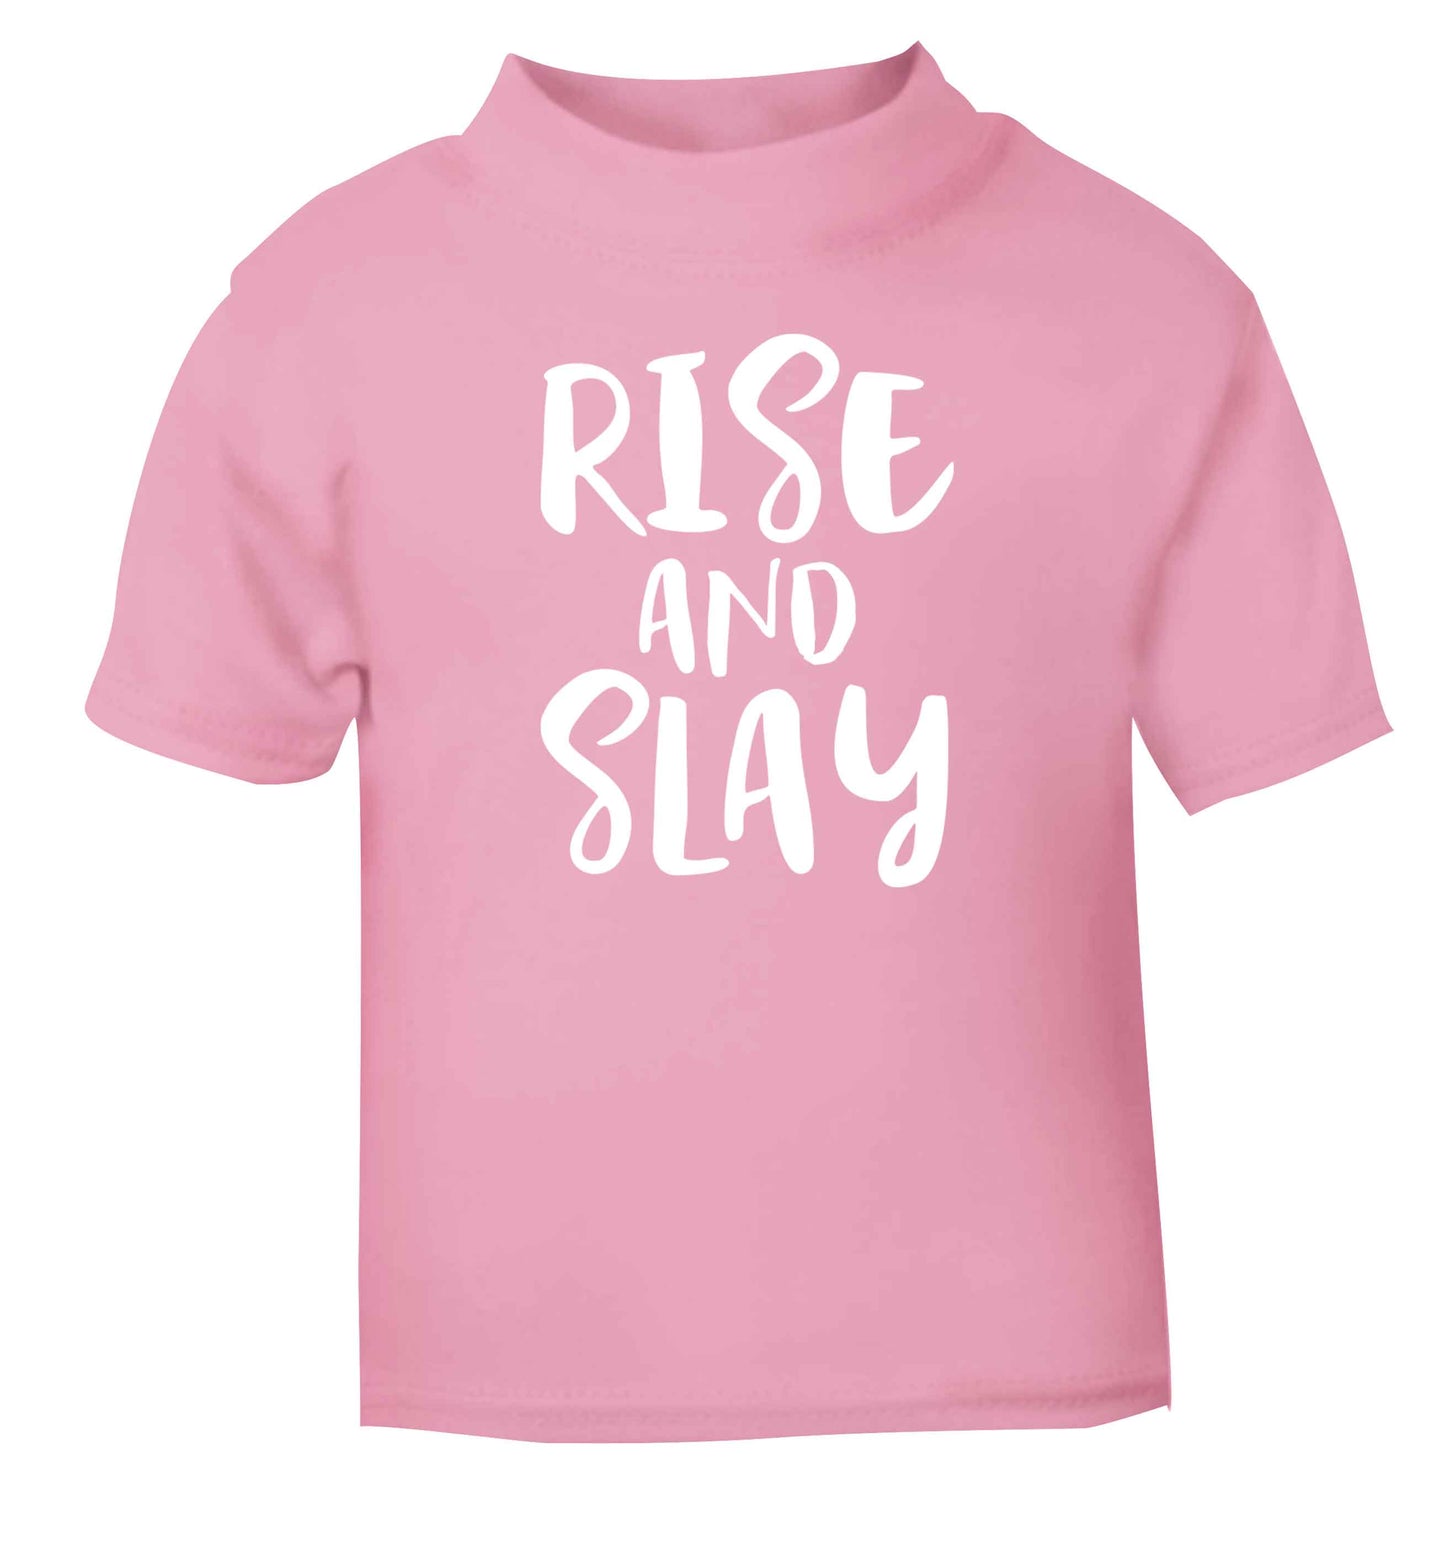 Rise and slay light pink Baby Toddler Tshirt 2 Years